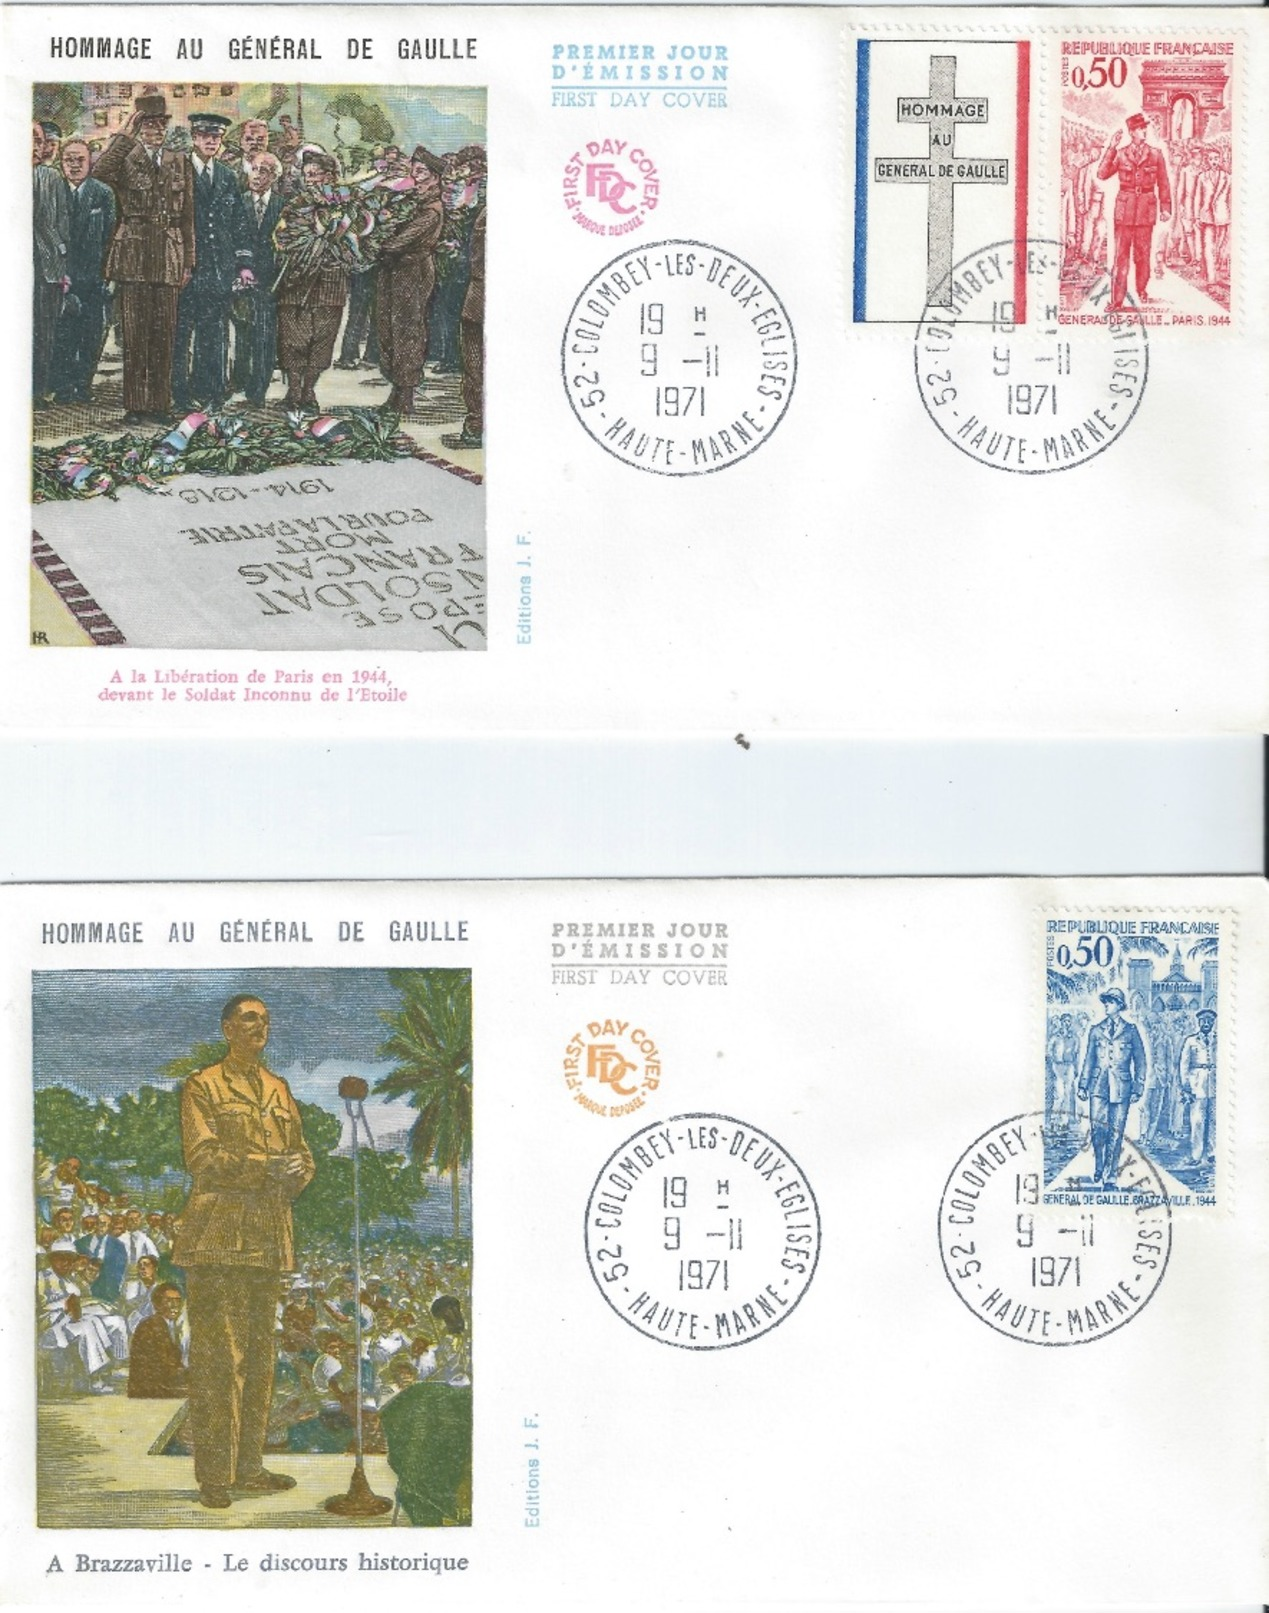 FRANCE 2 X Charles De Gaulle Colour Illustrated Homage Scarce 1971 FDC - 1970-1979